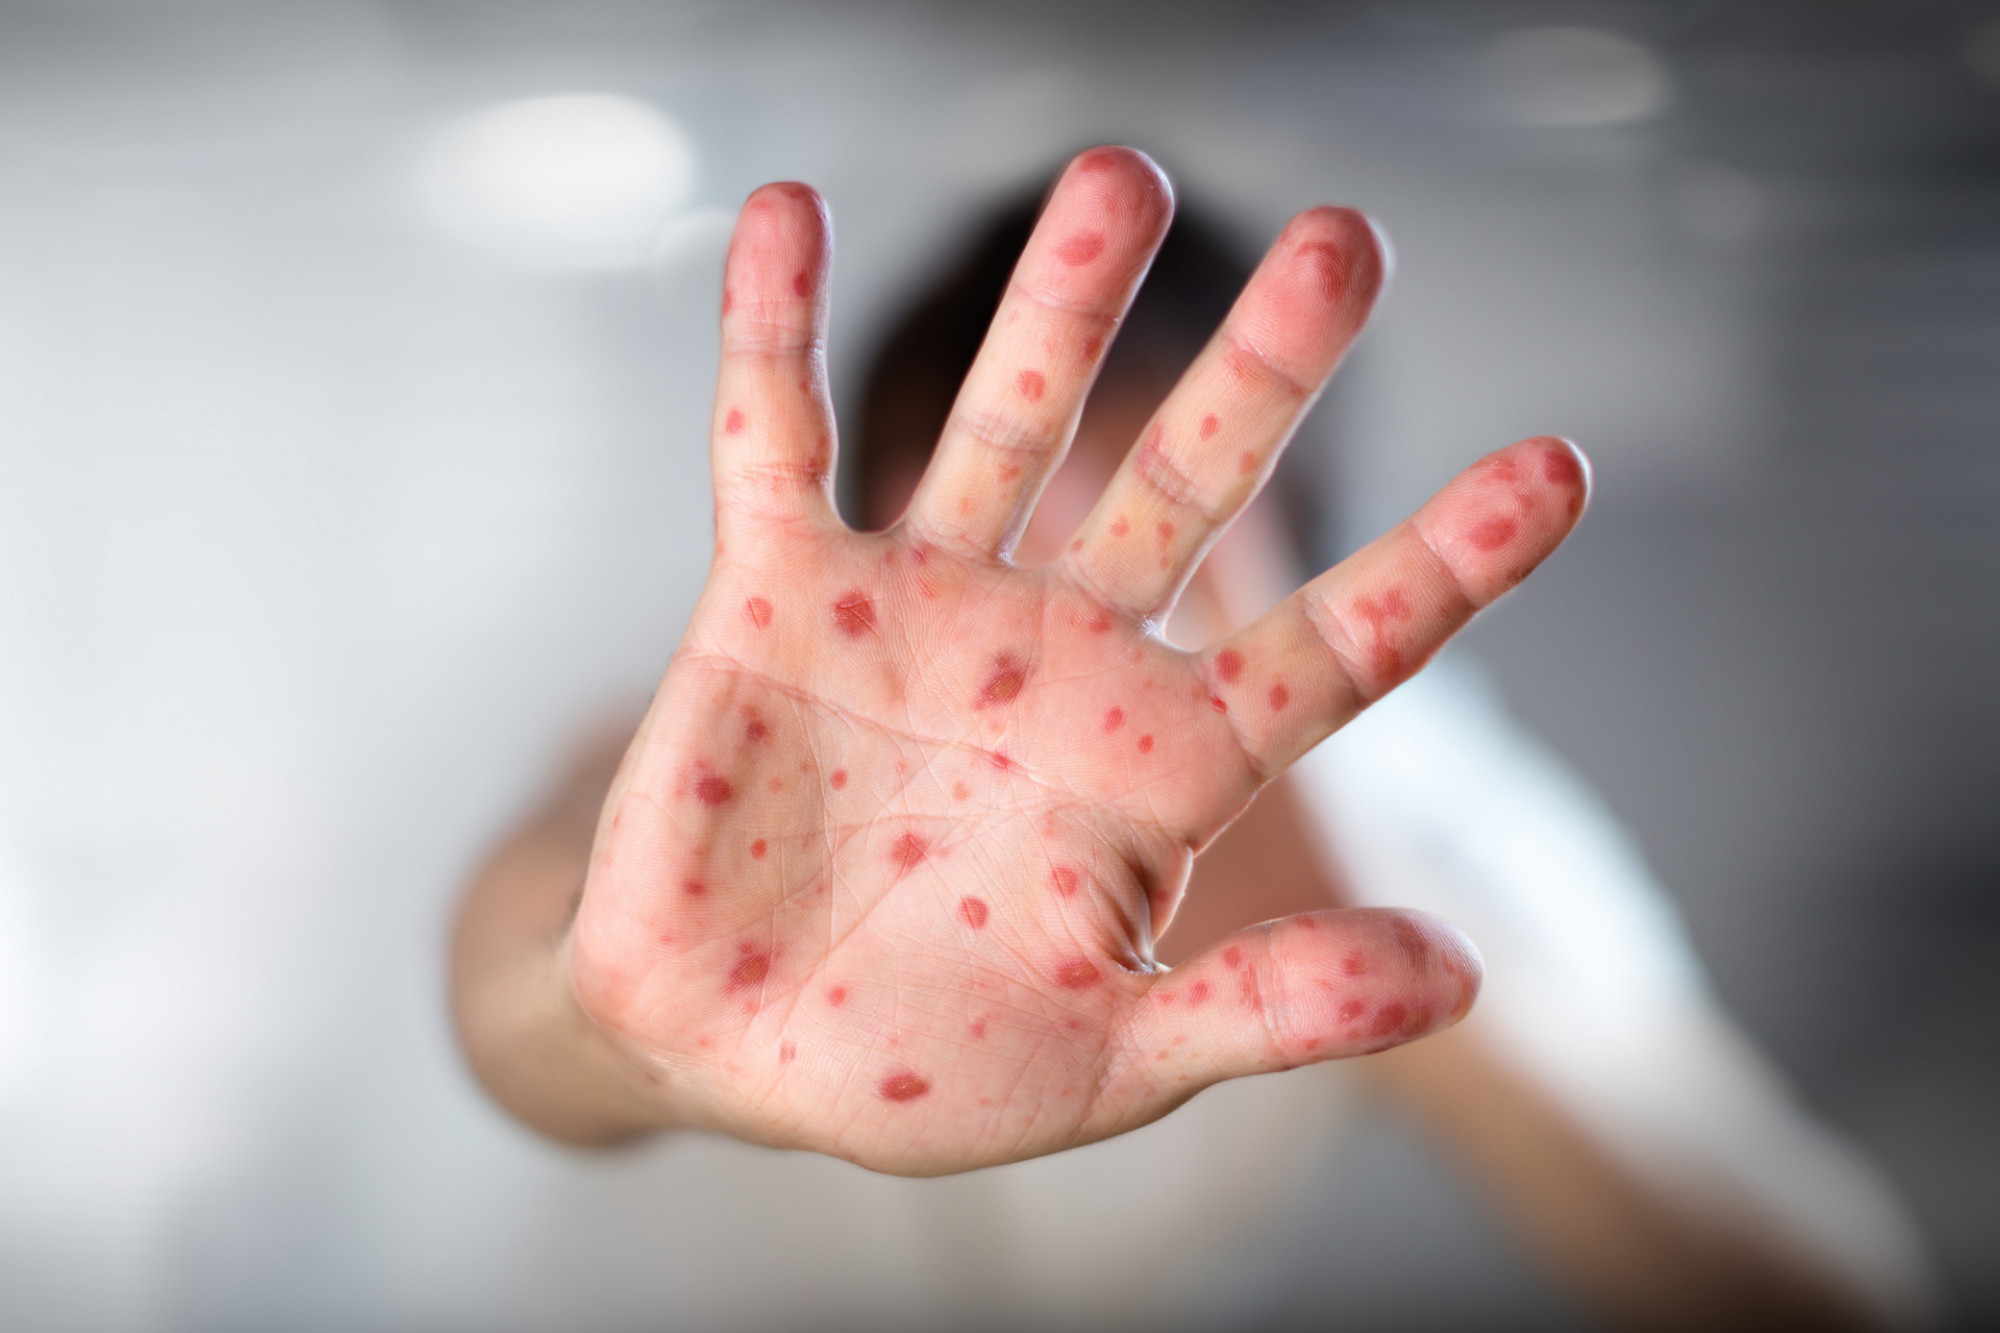 Hand, Foot and Mouth Disease warning for Far North - feature photo